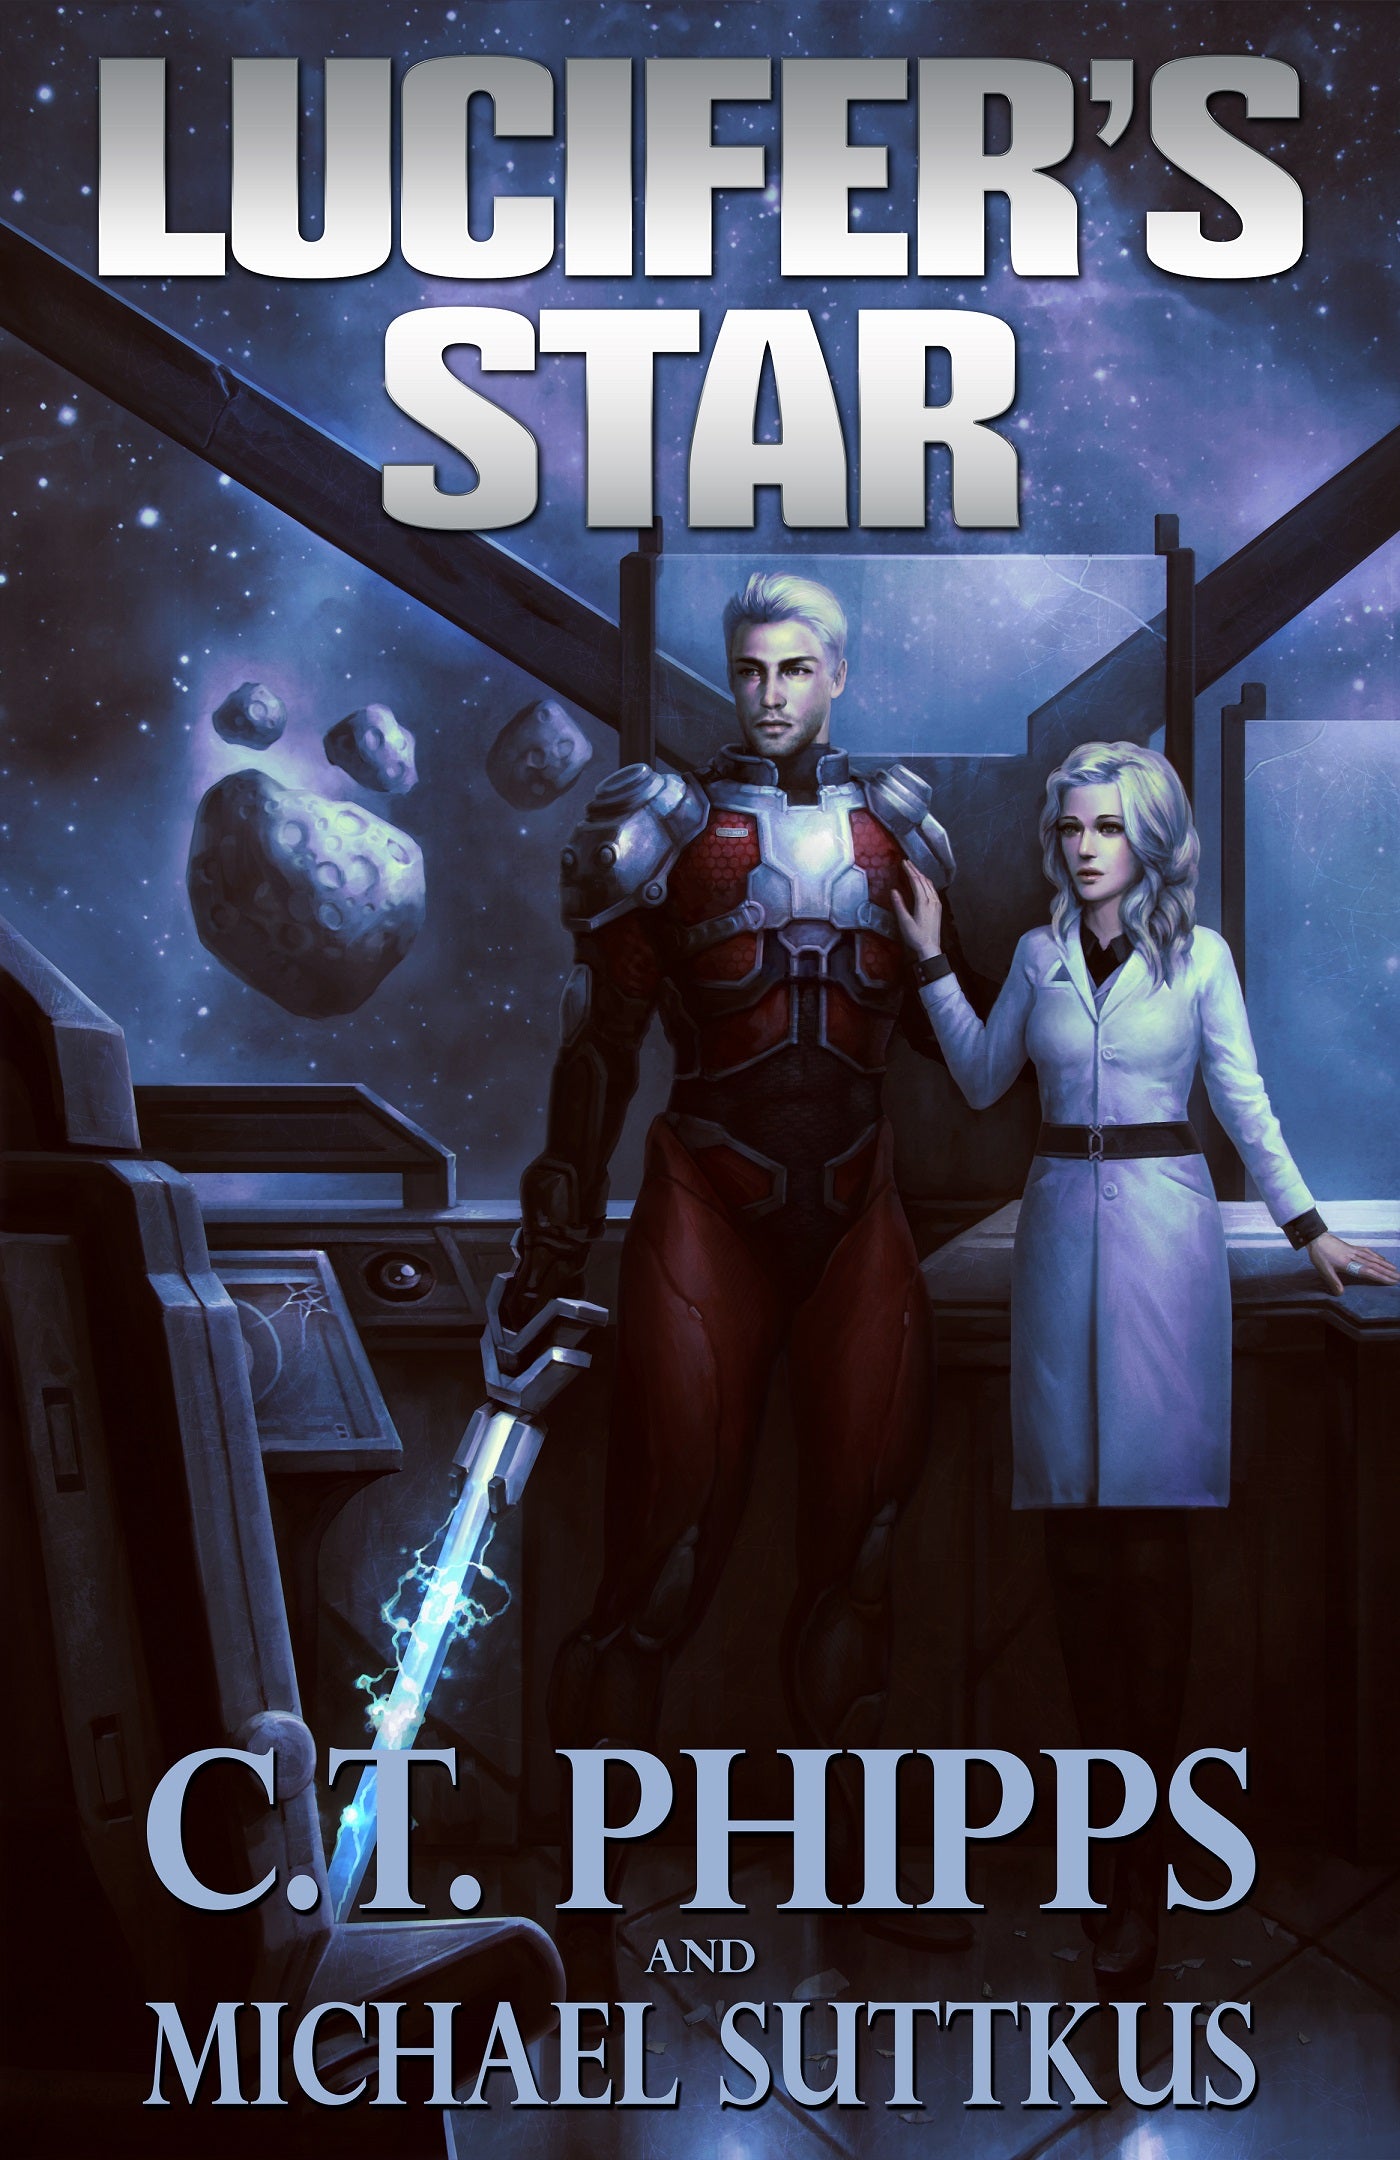 Book Review: Lucifer's Star by C.T. Phipps